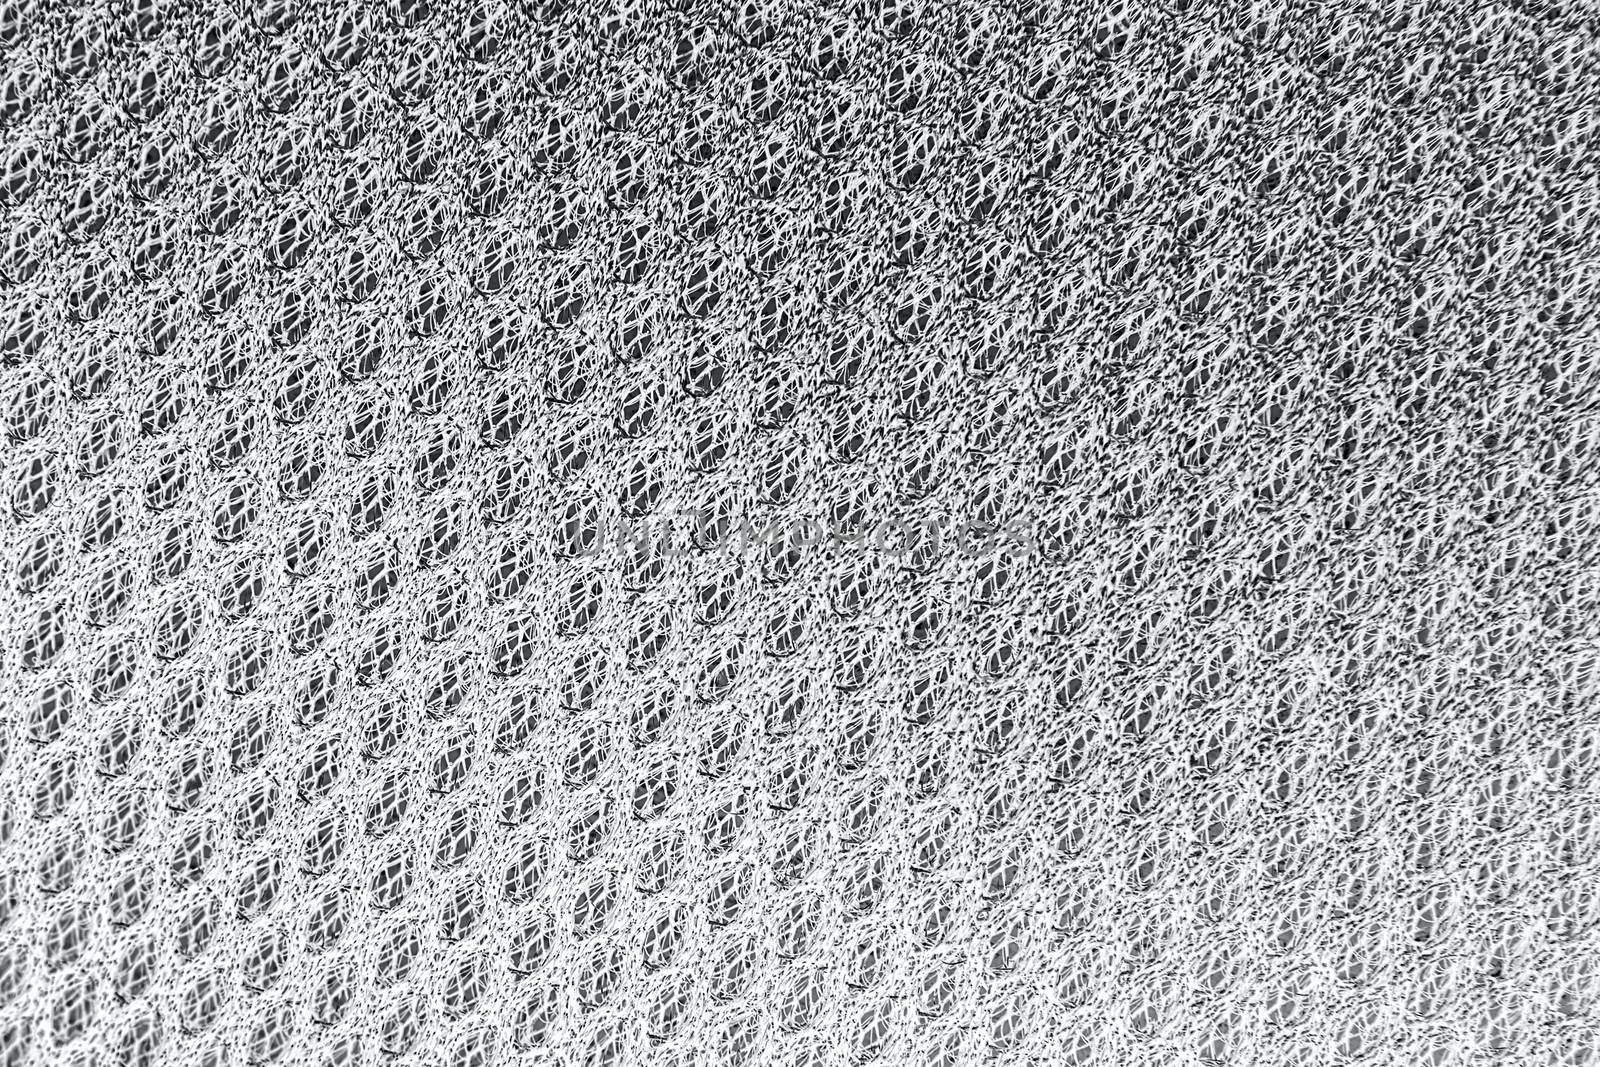 Texture background of polyester fabric. Plastic weave fabric pattern